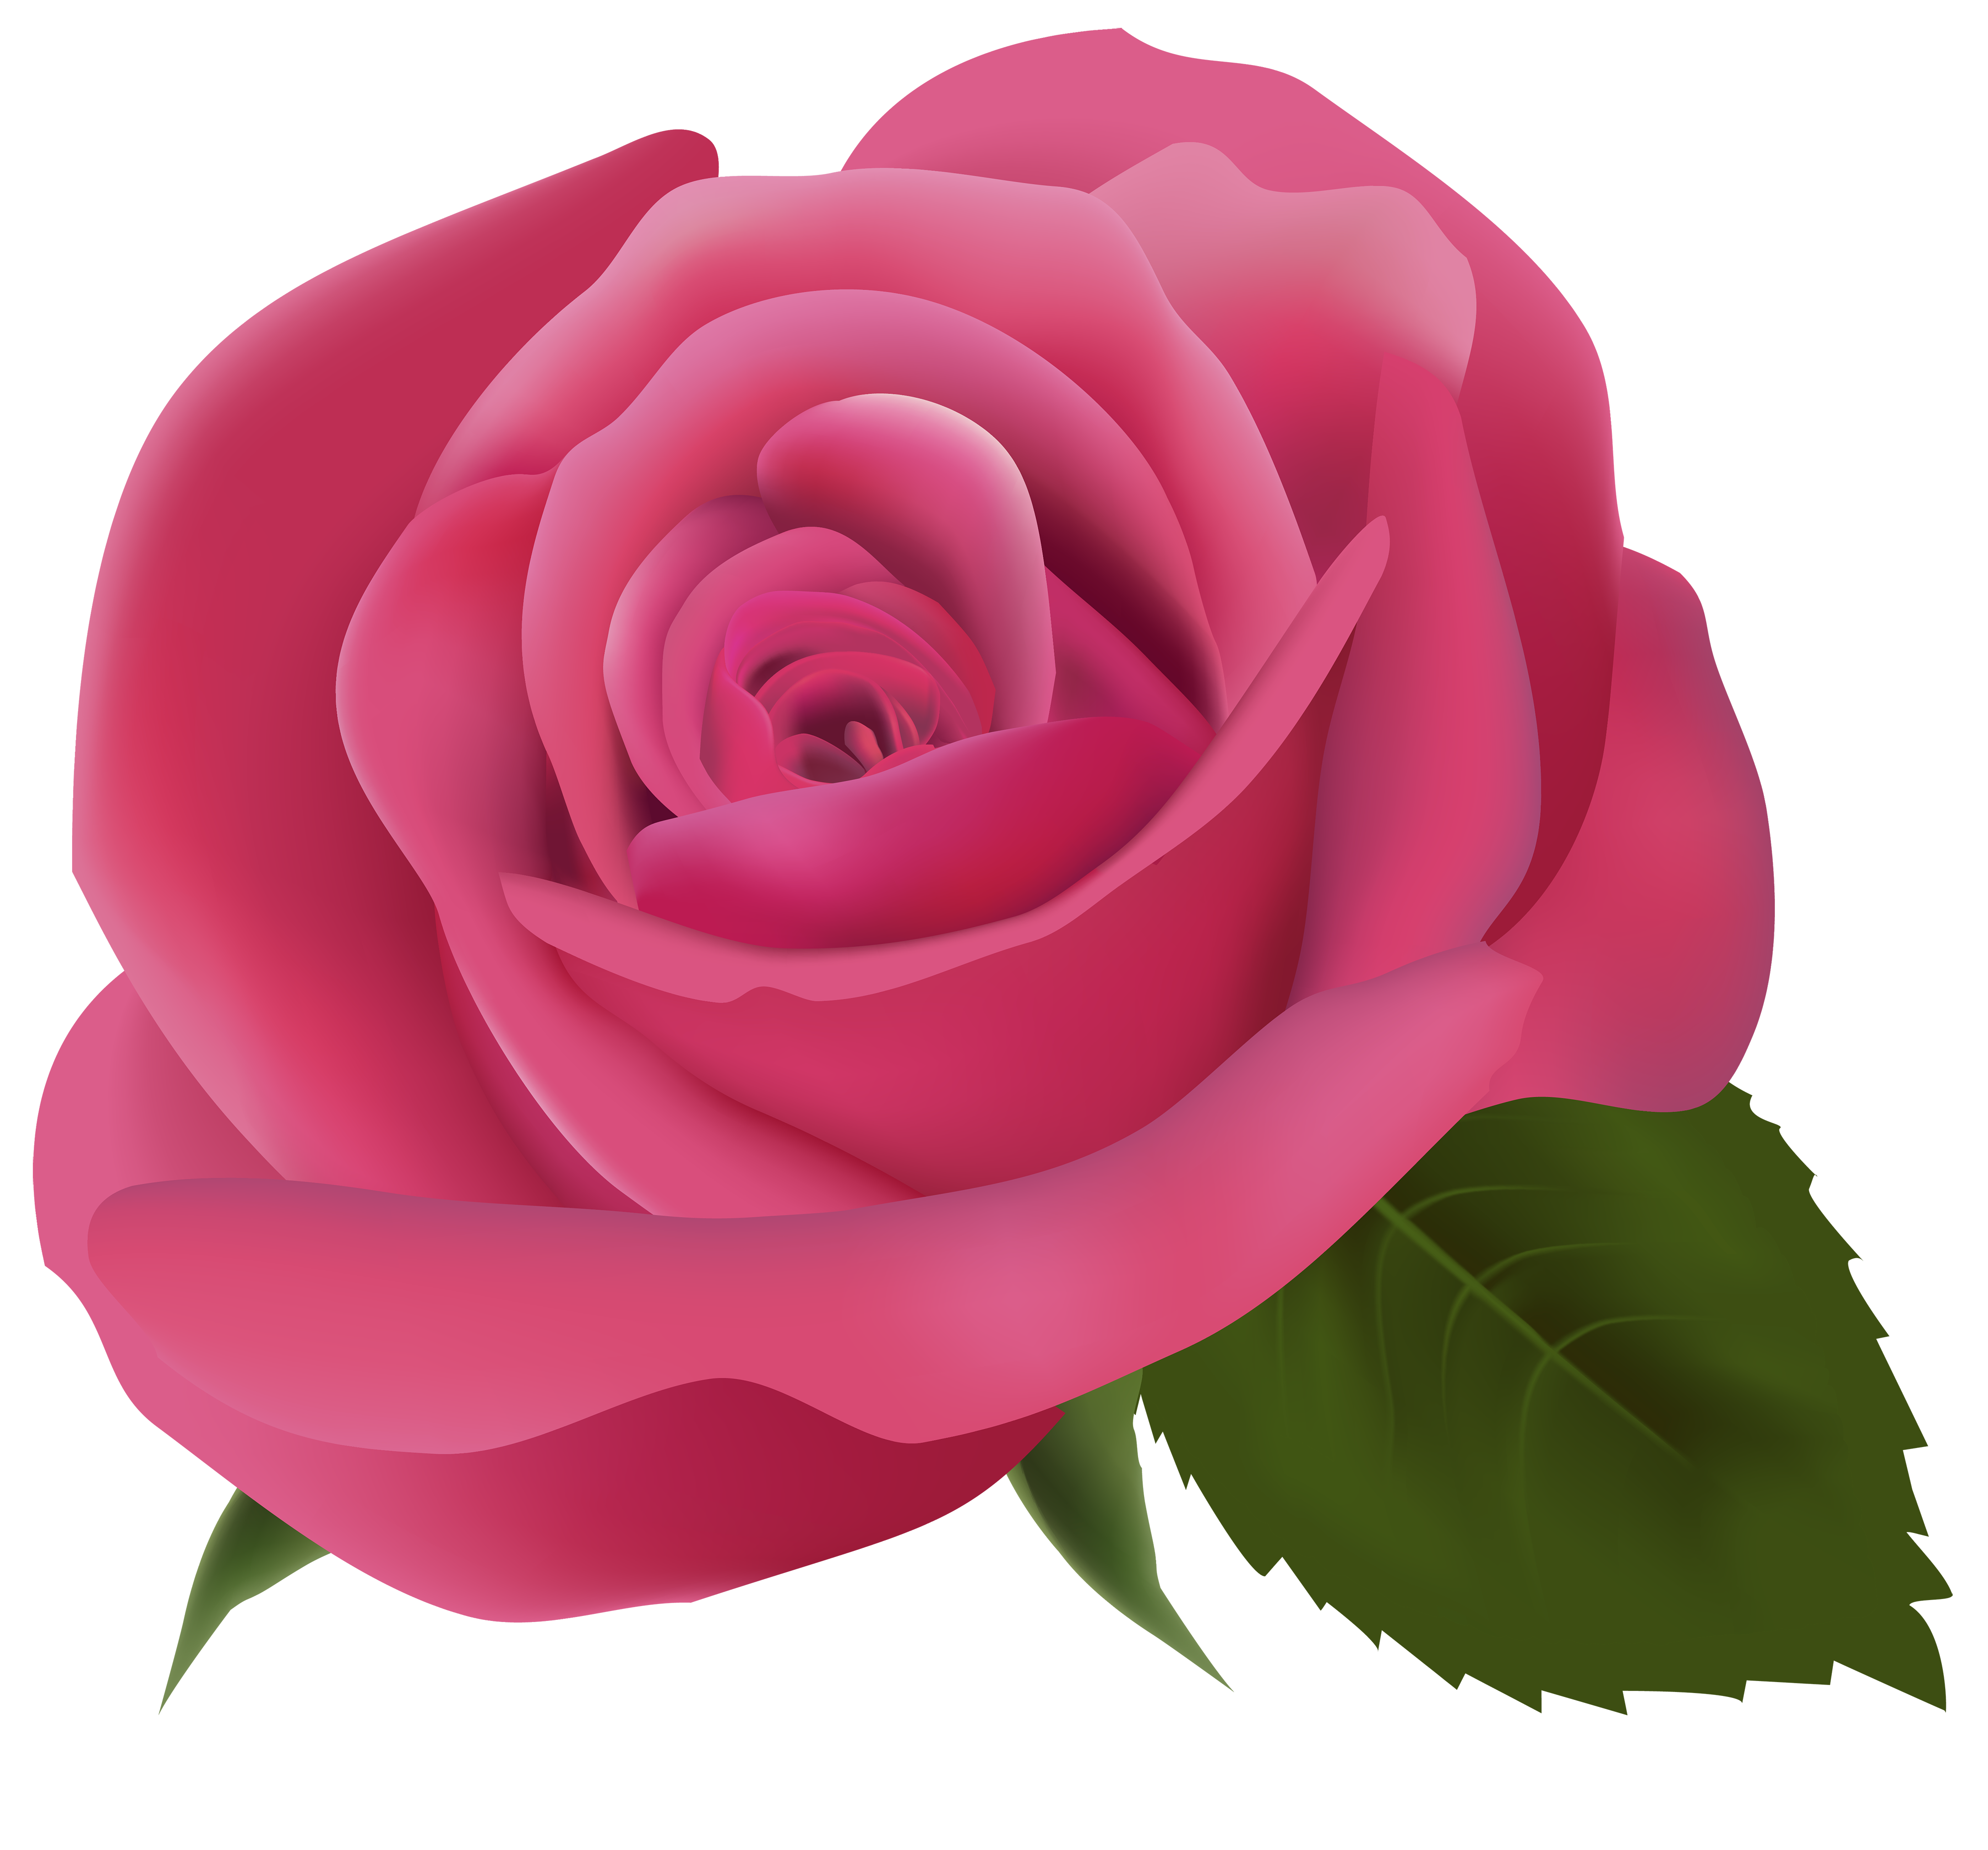 Image detail for -Pink Rose A